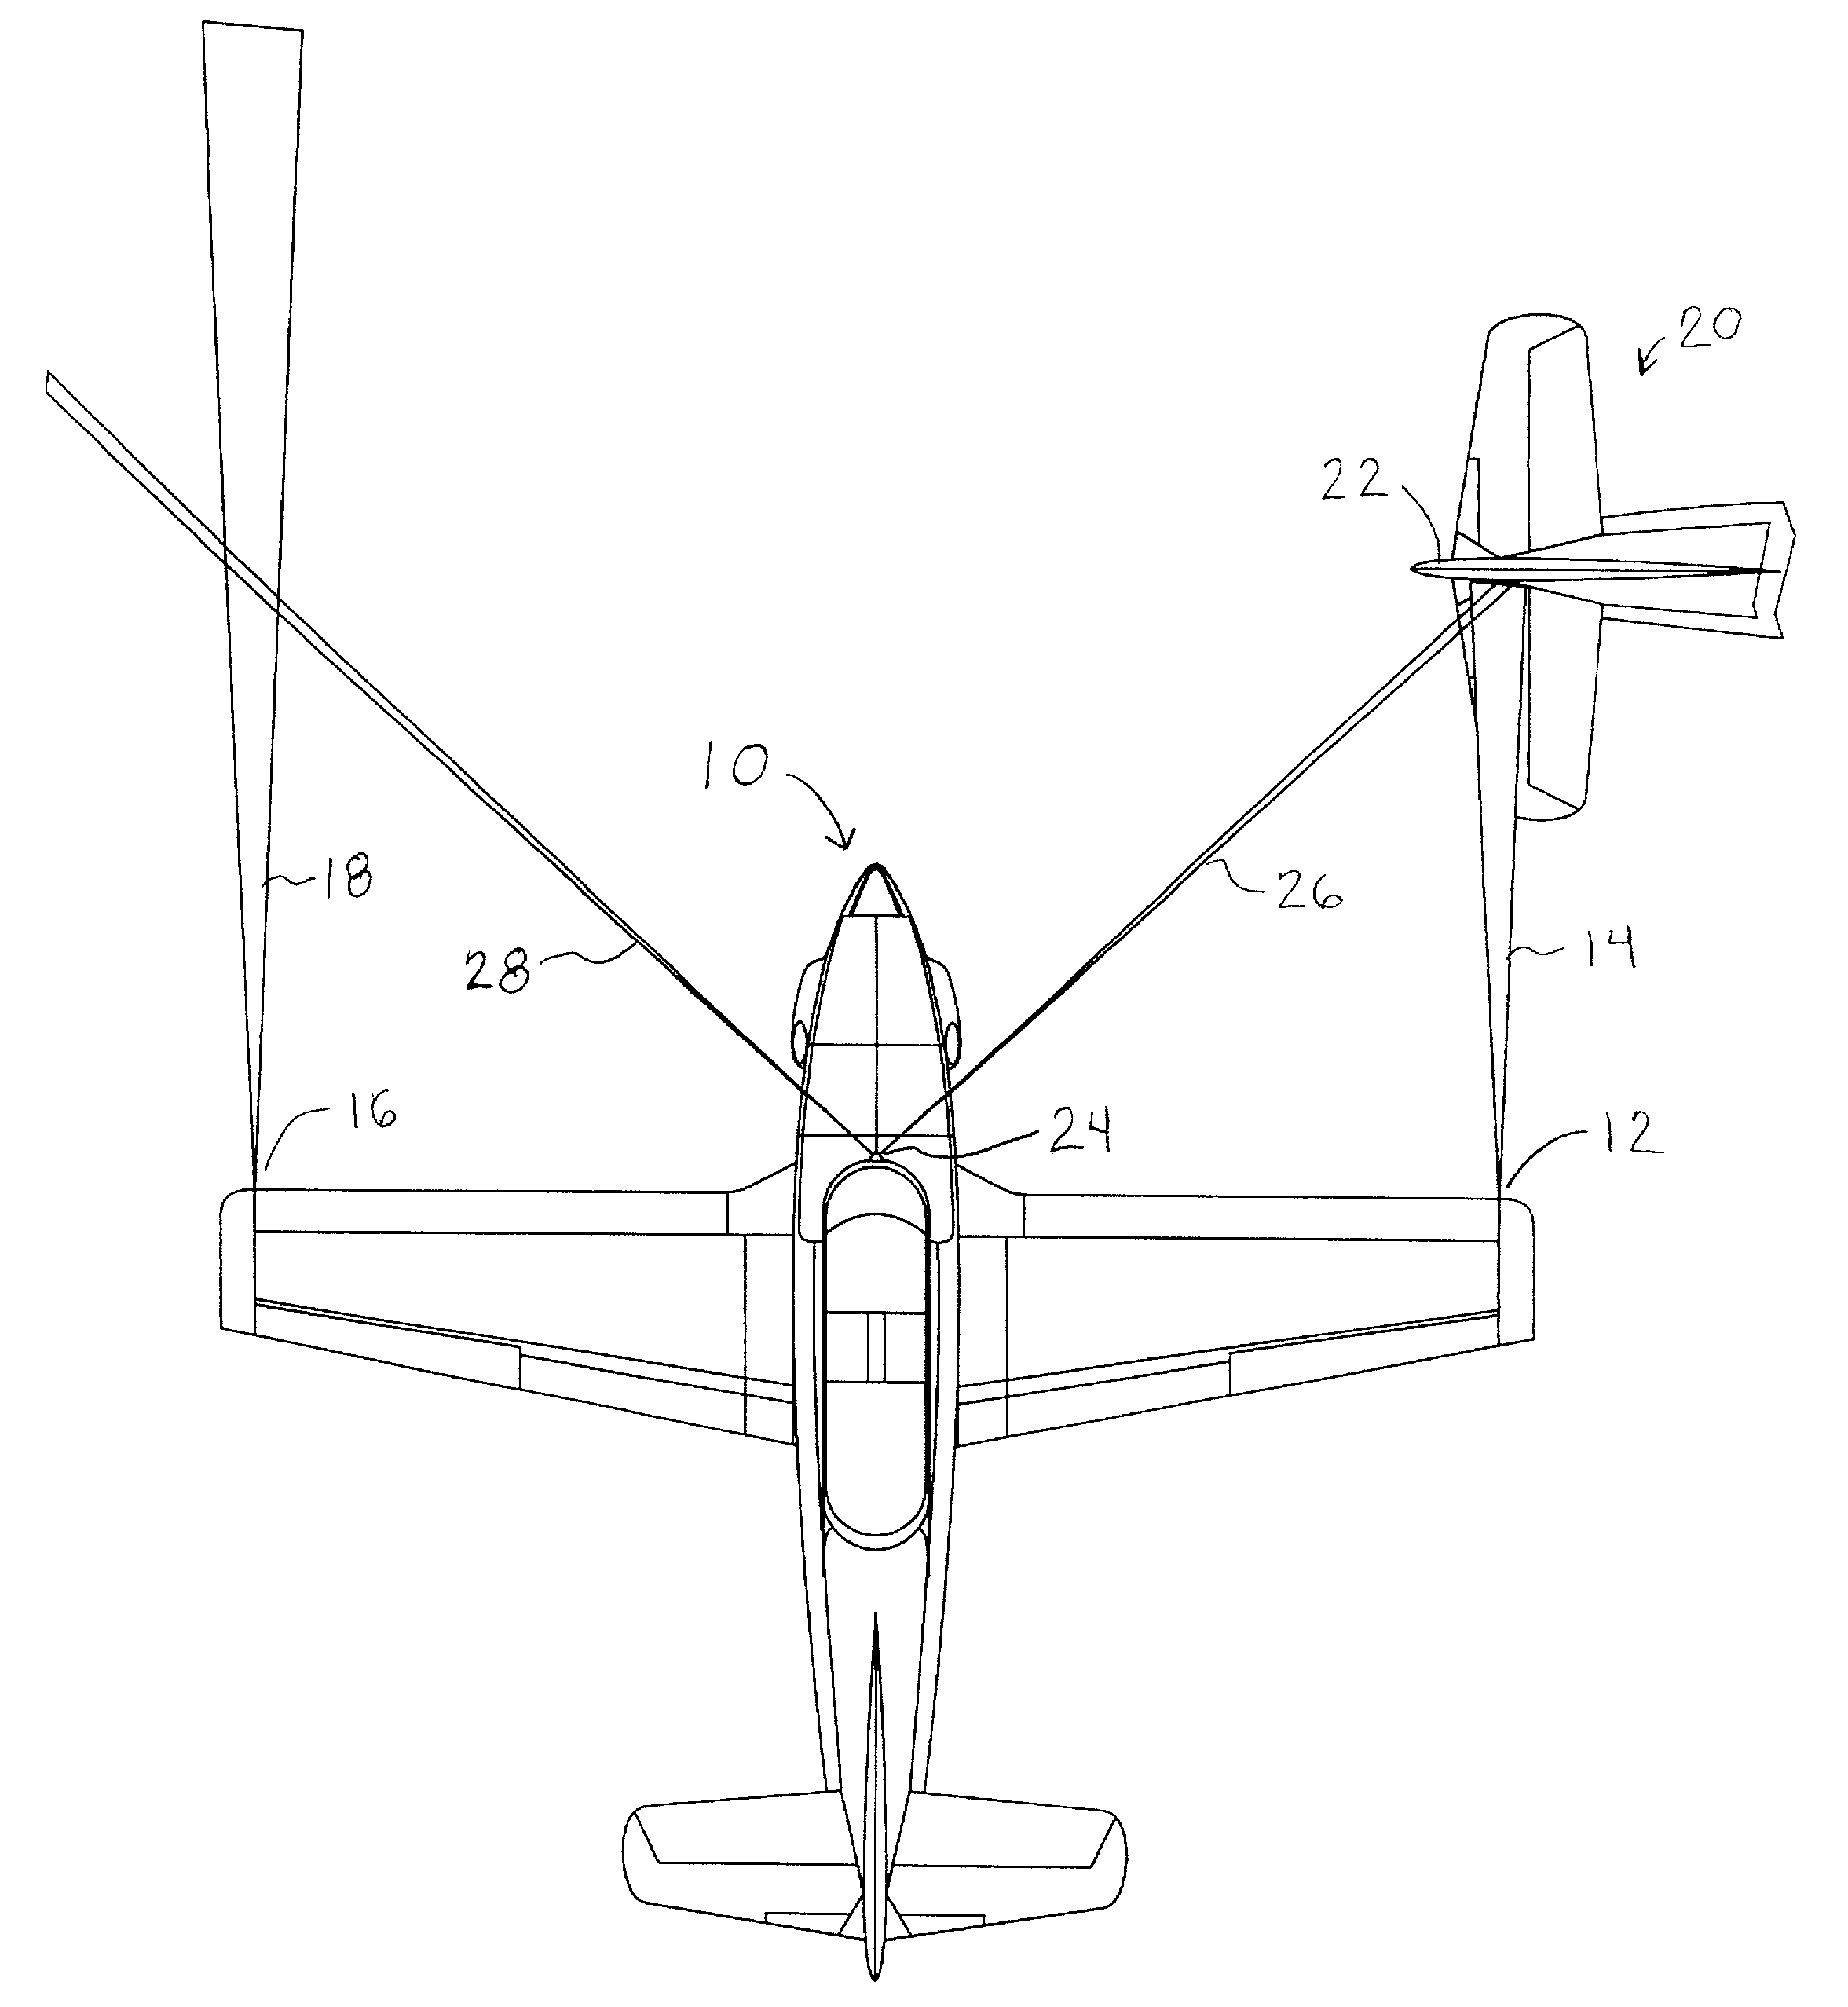 System and method of preventing aircraft wing damage